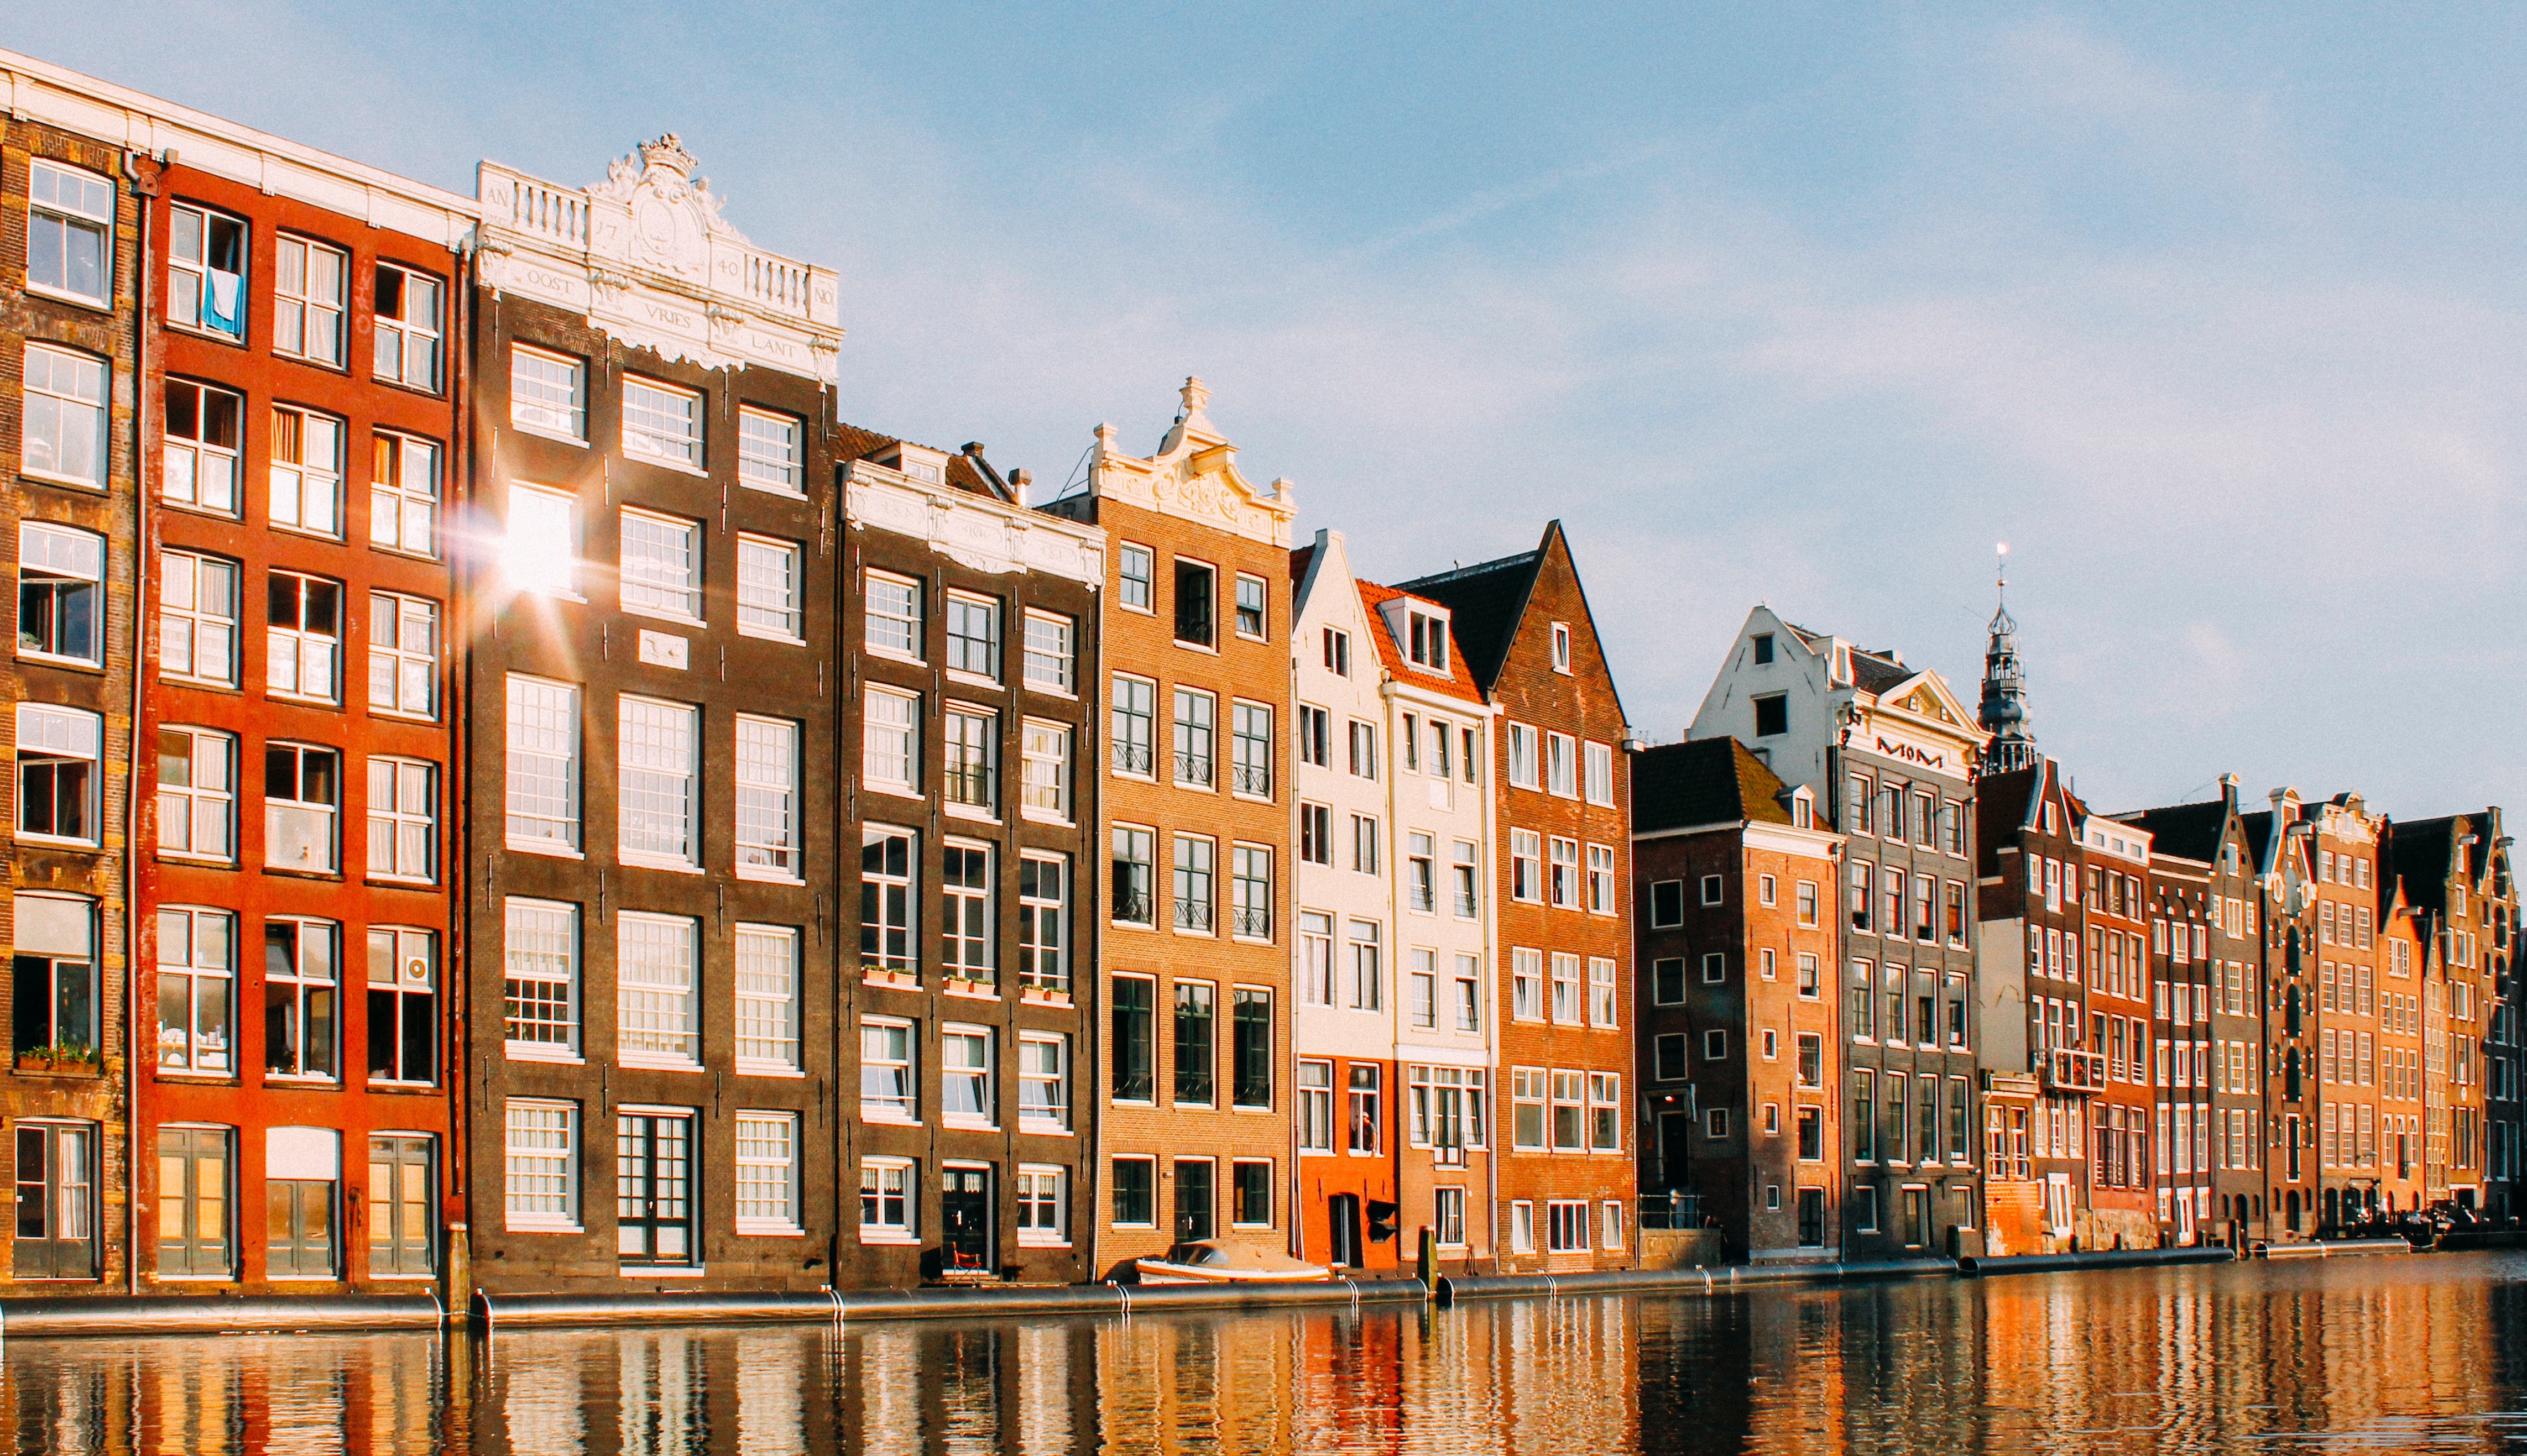 Deal Alert: Fly To Amsterdam For As Low As $330 Round-Trip